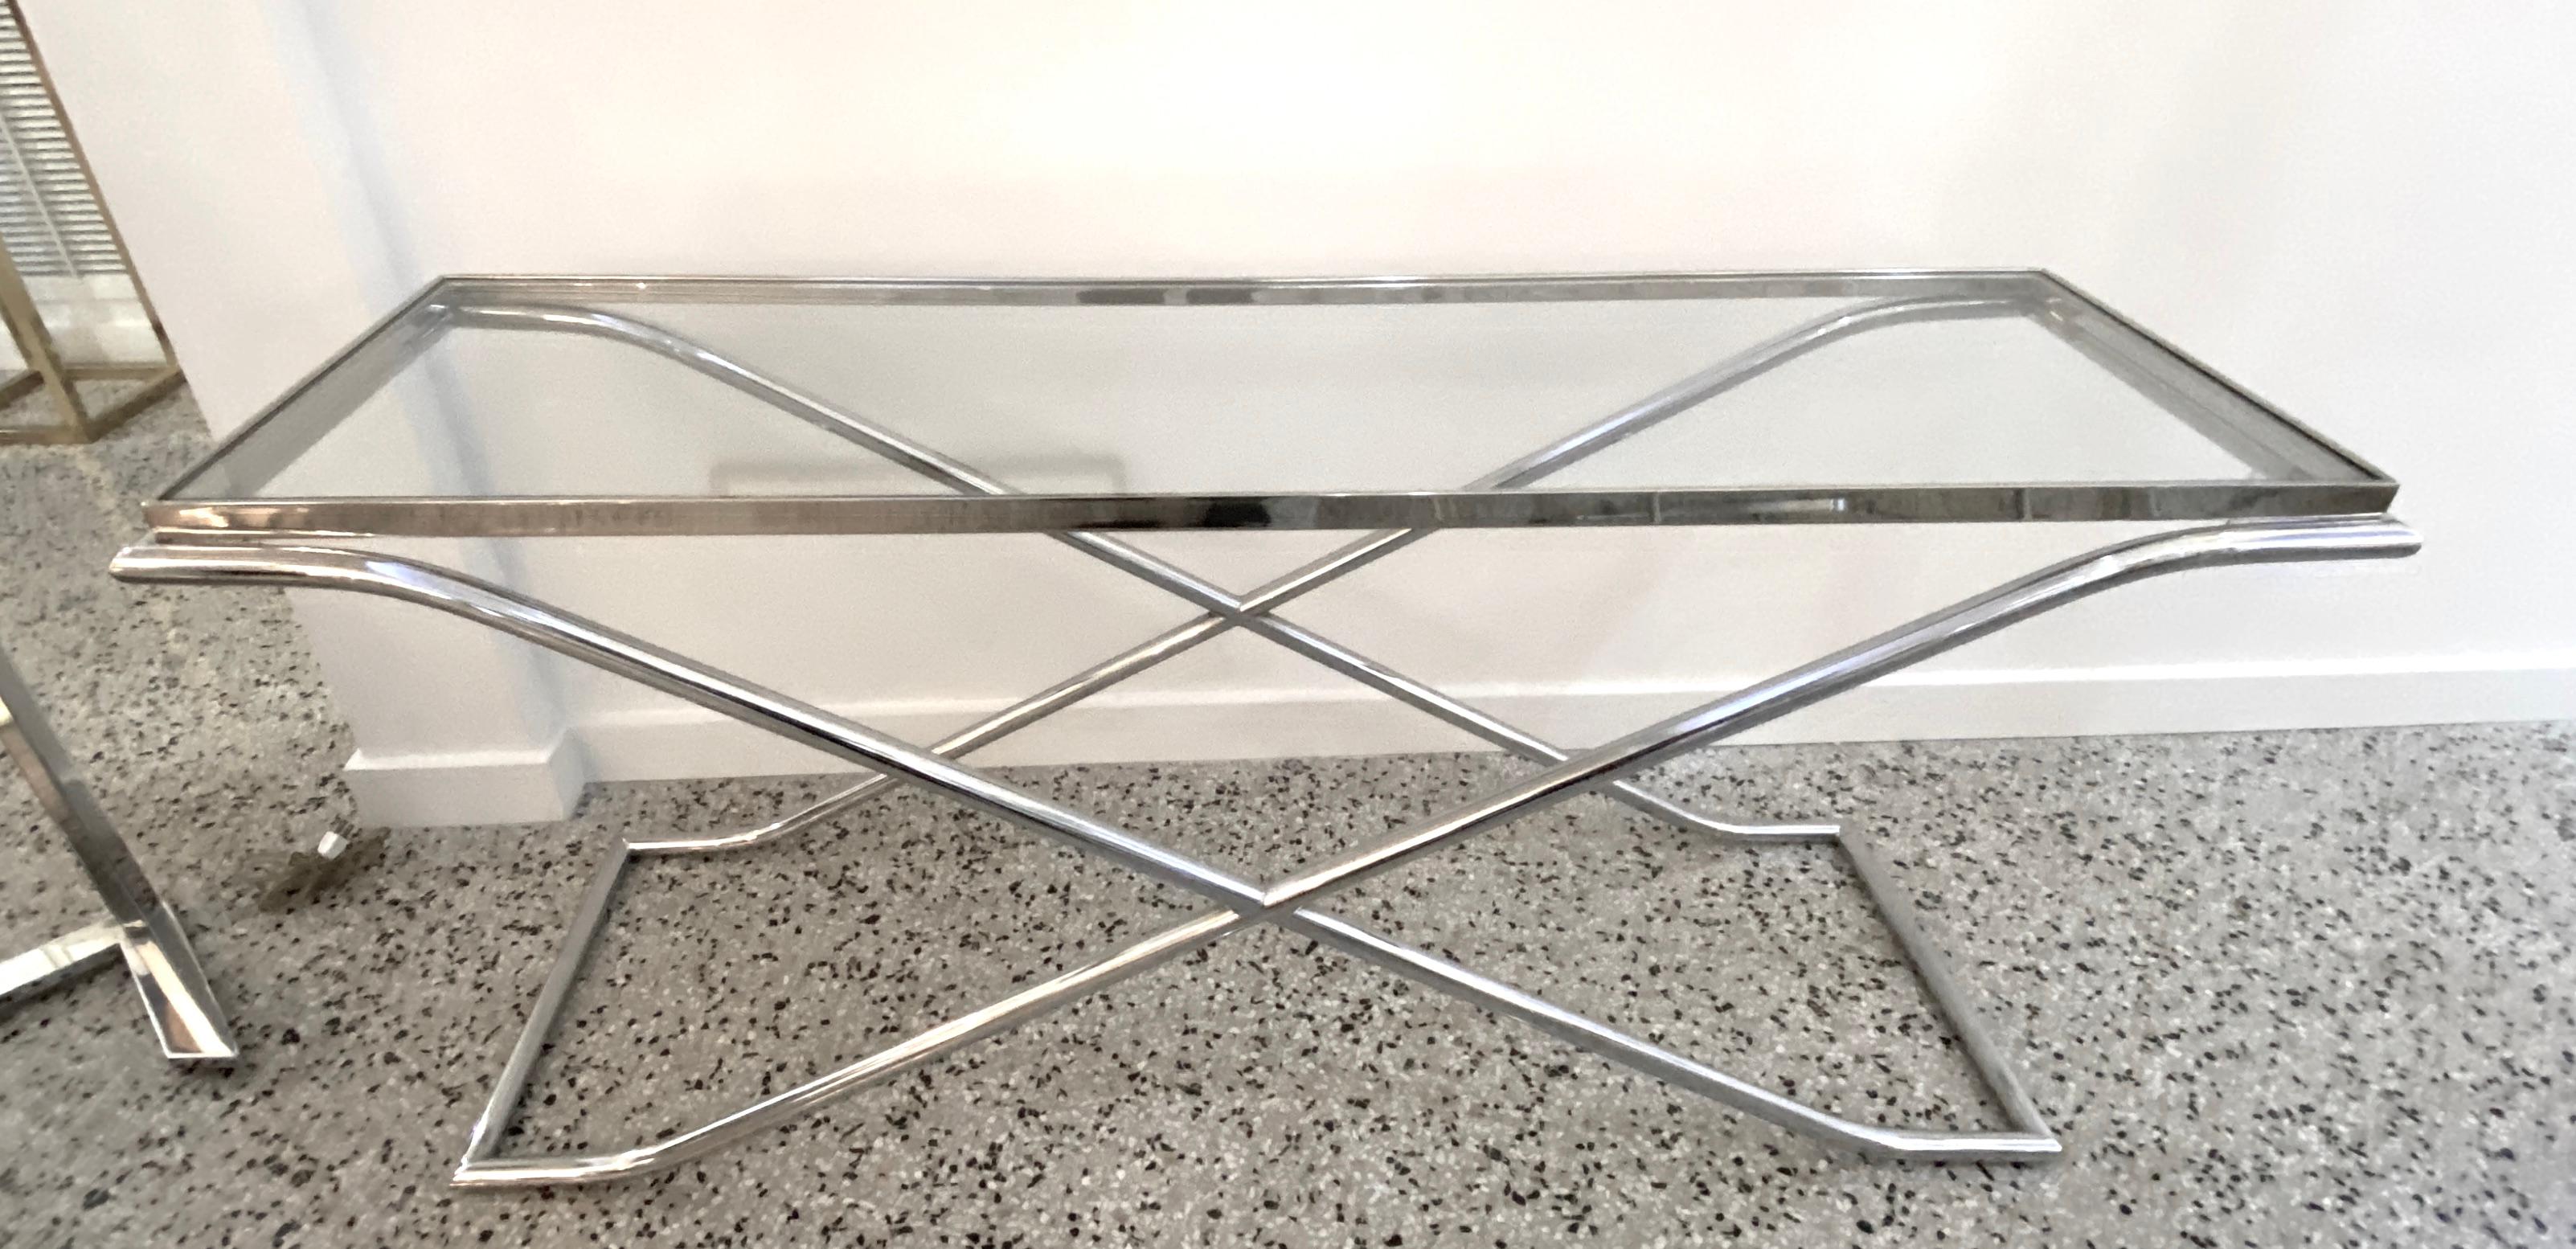 This stylish Art Deco inspired console table was recently acquired from a Palm Beach estate and will make the perfect understated piece for your home.